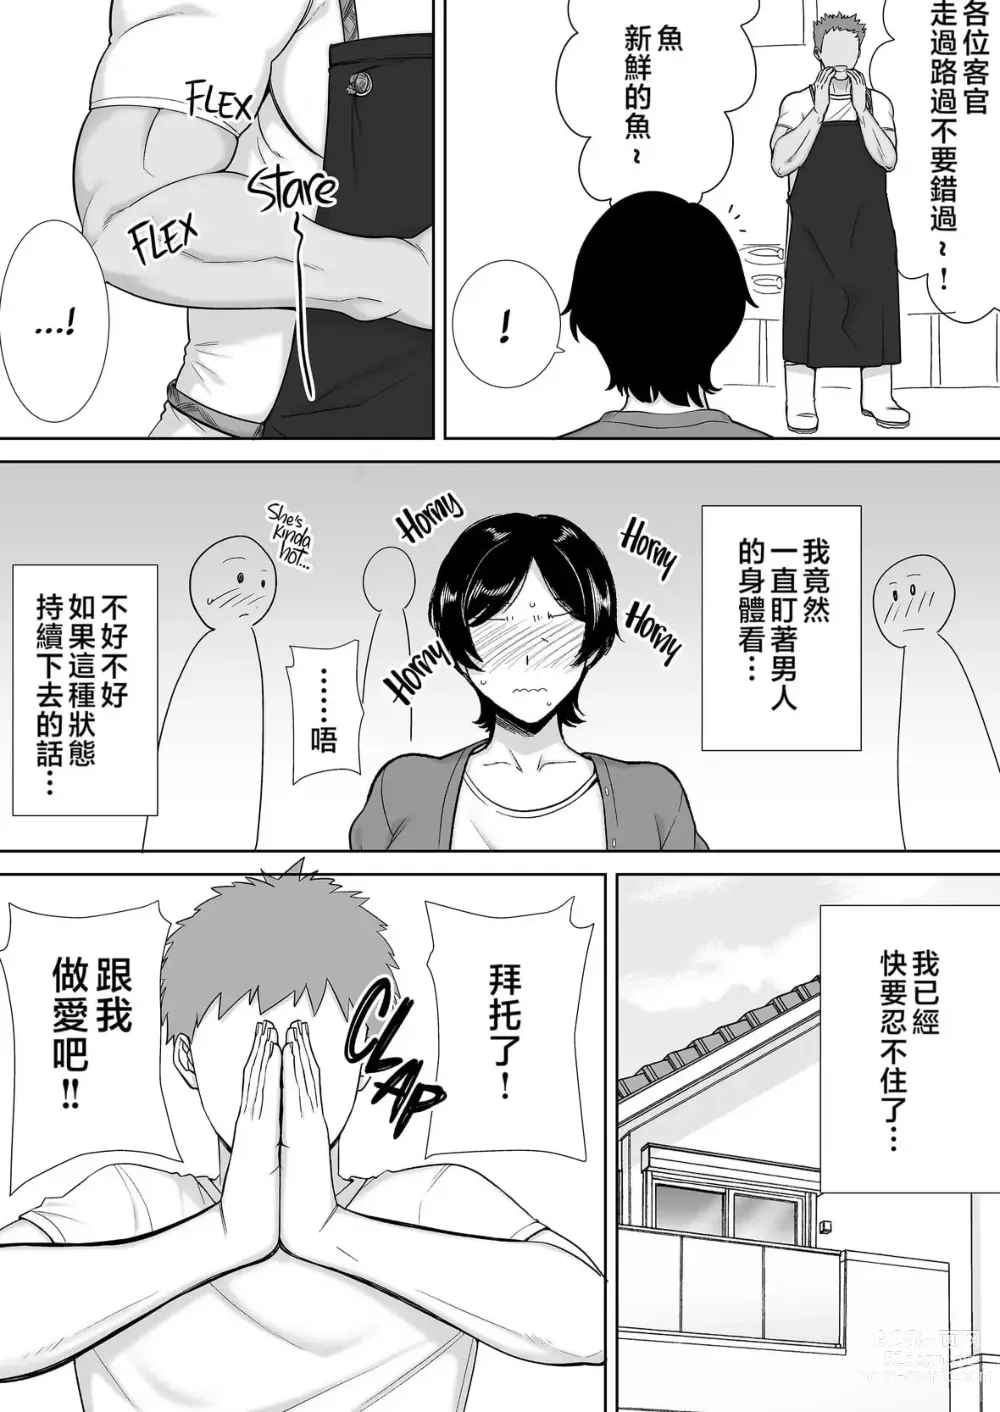 Page 15 of doujinshi even mom want a litle lovin